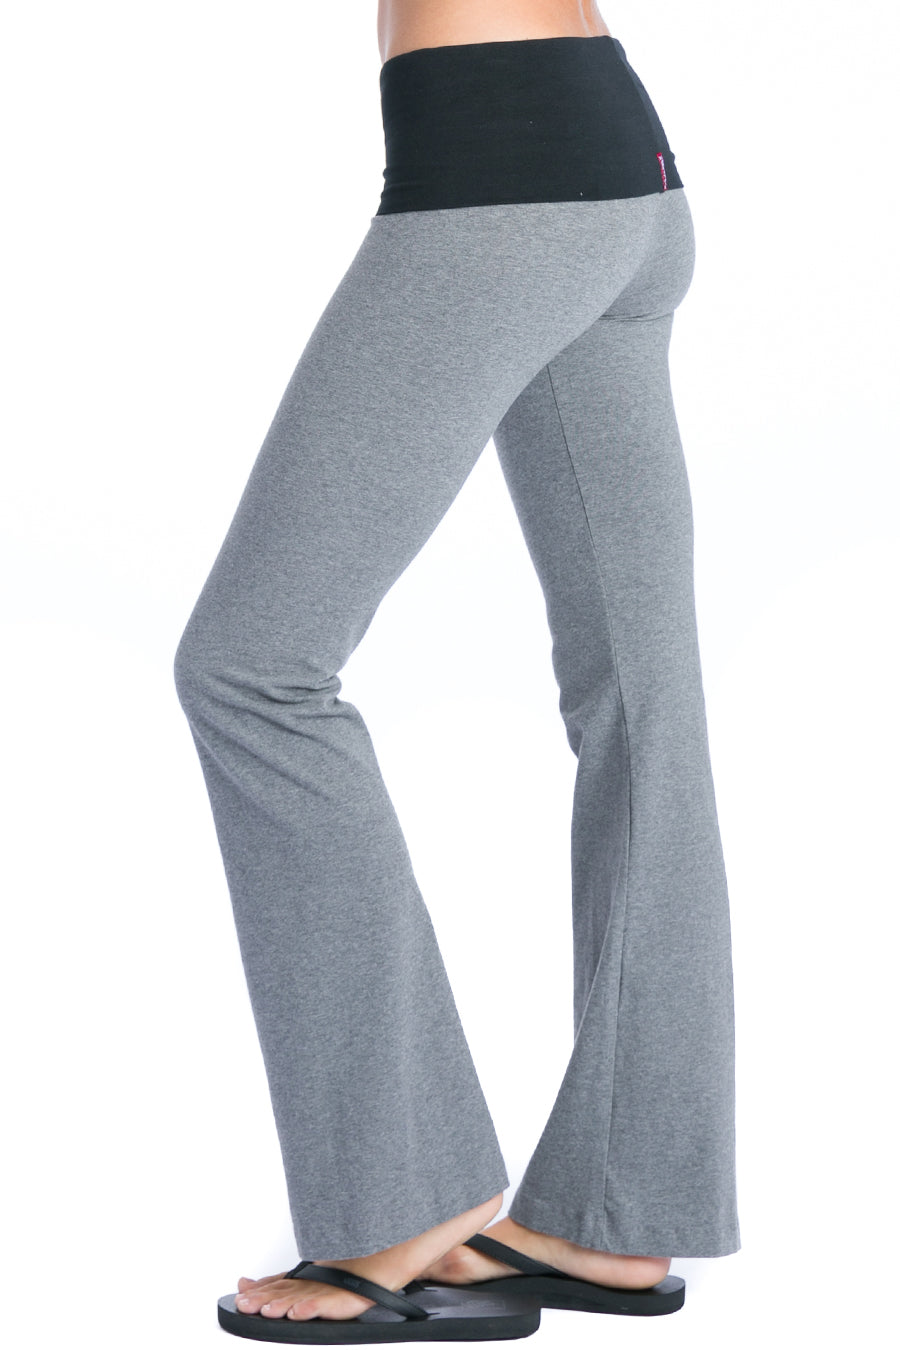 Hard Tail Forever Contour Rolldown Bootleg Flare Pants - Charcoal Heather Gray-Black - XS